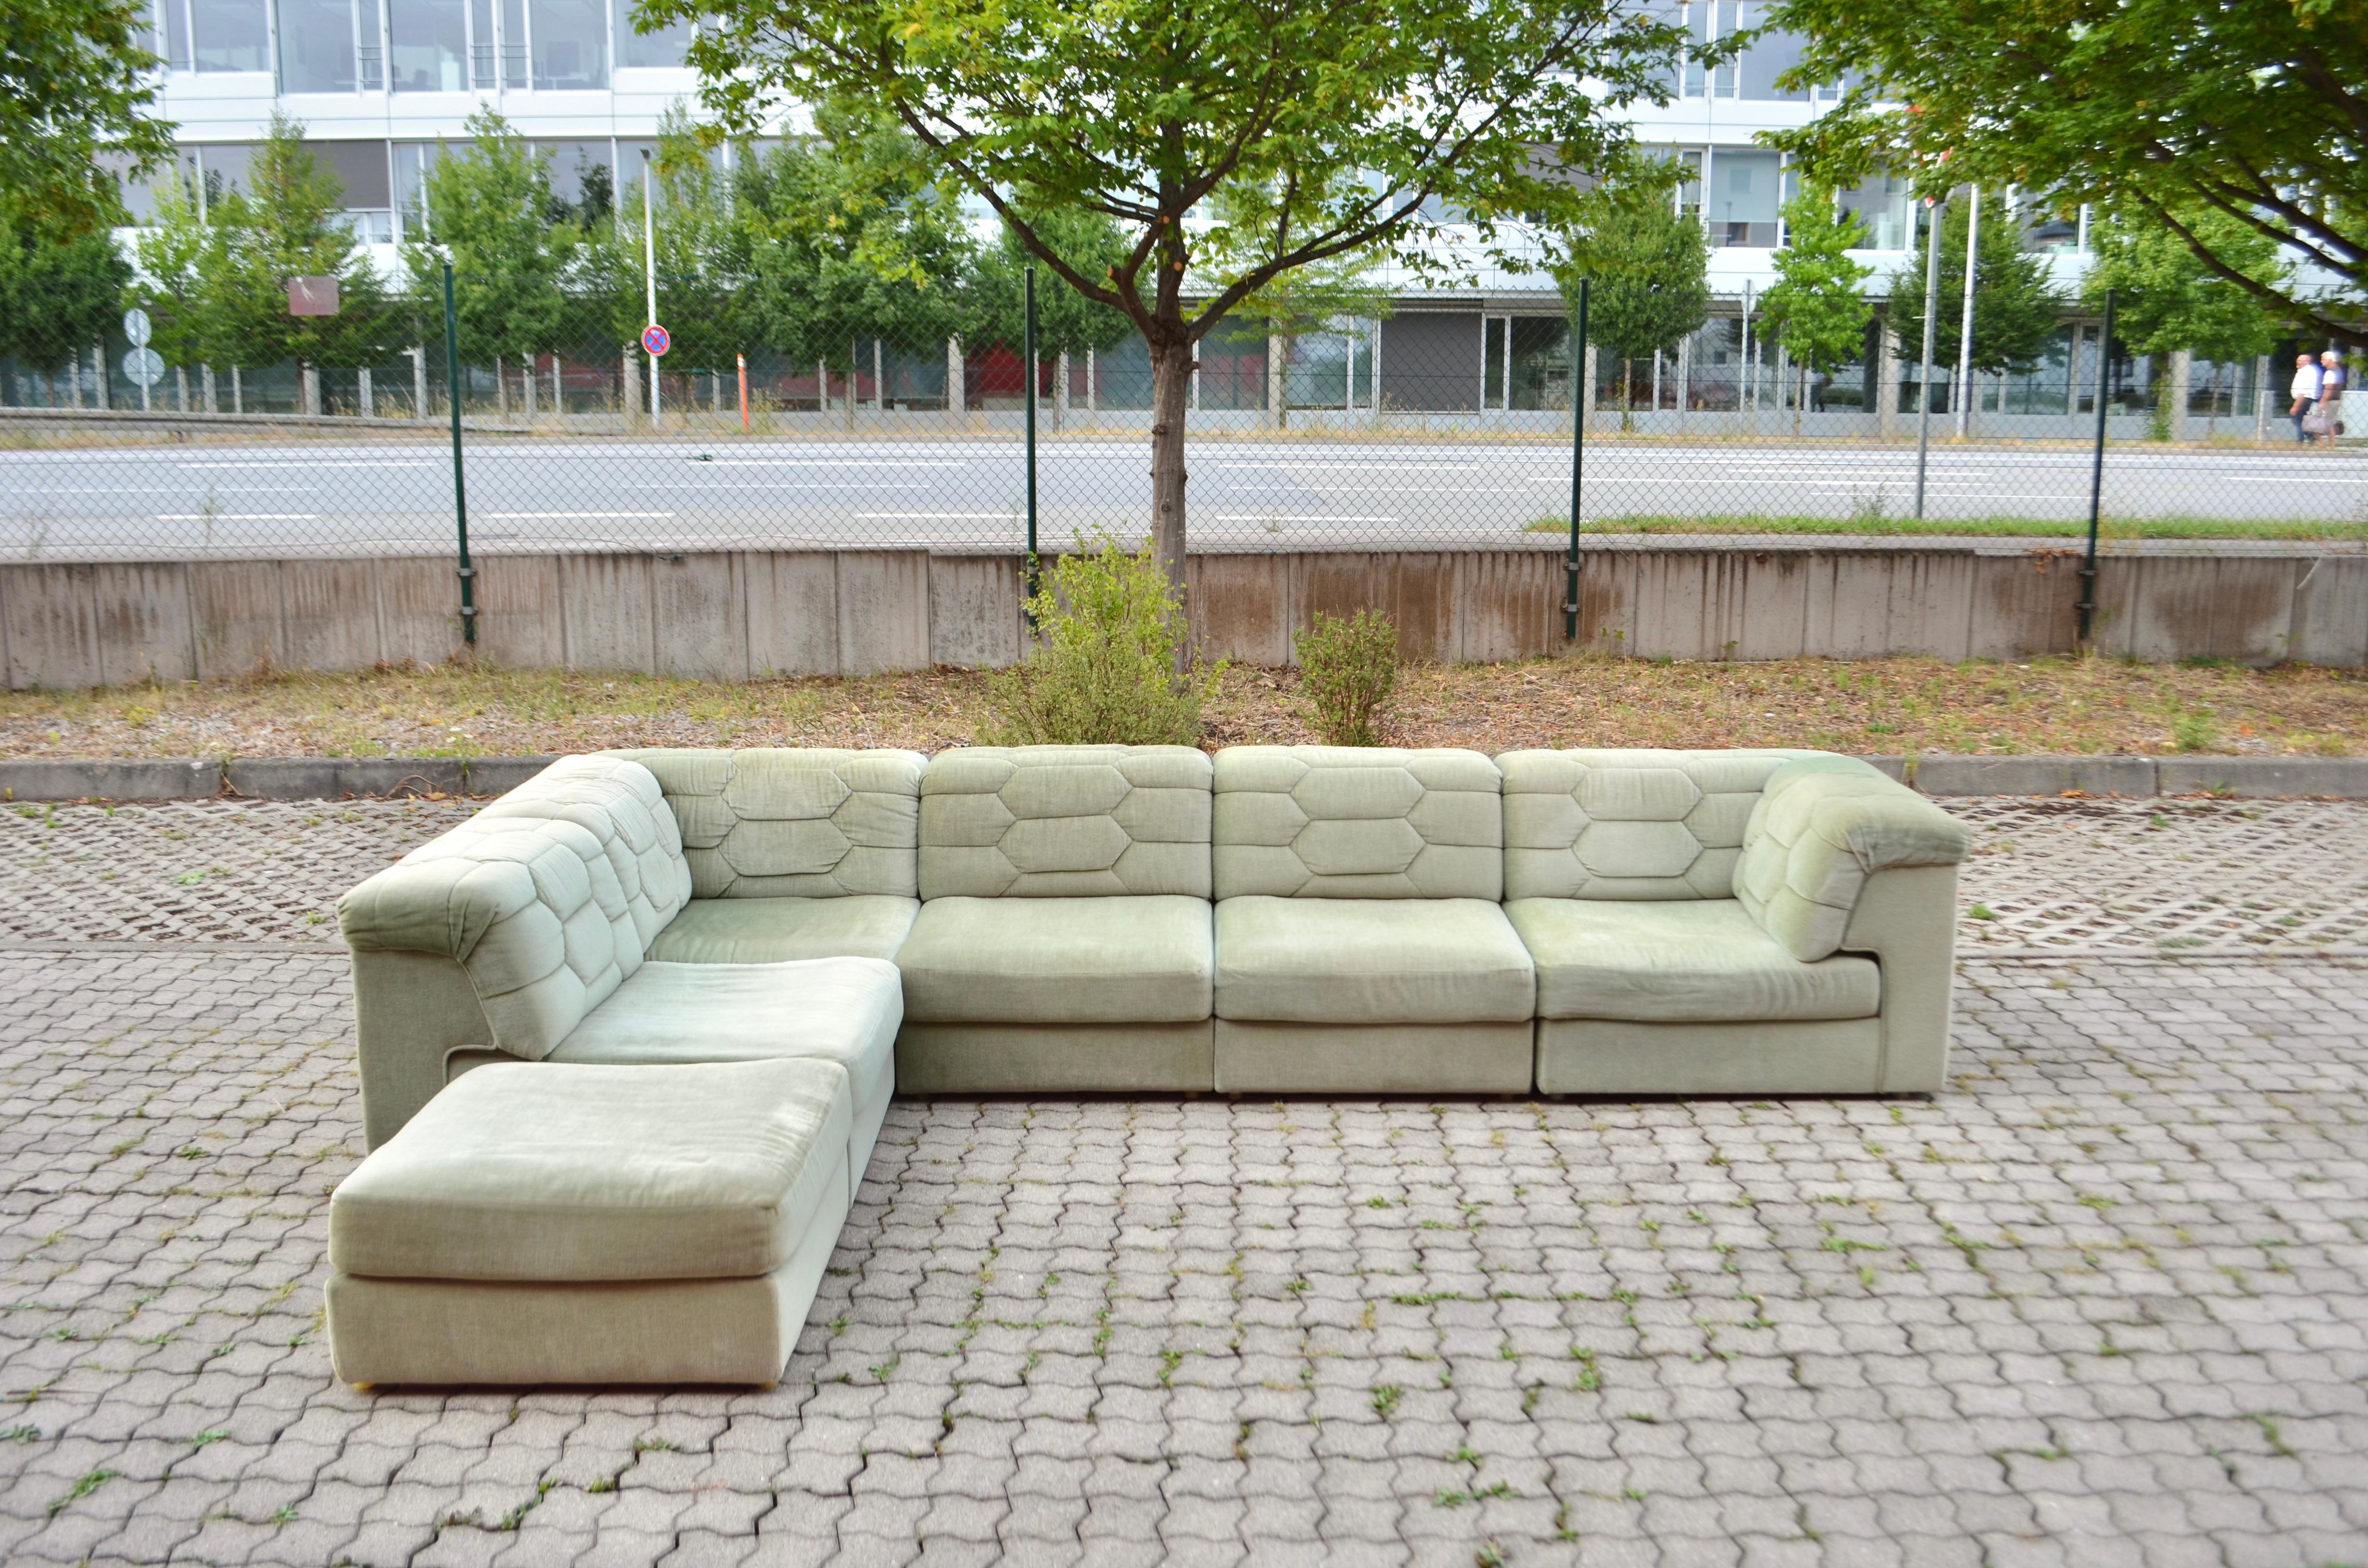 This Modular sectional sofa was manufactured by Laauser in Germany.
It is a pure 70ties design with timeless modern shape.
The fabric is Mohair and has a beautiful pastel green colour.
The frame of every element is made of wood and upholstery in